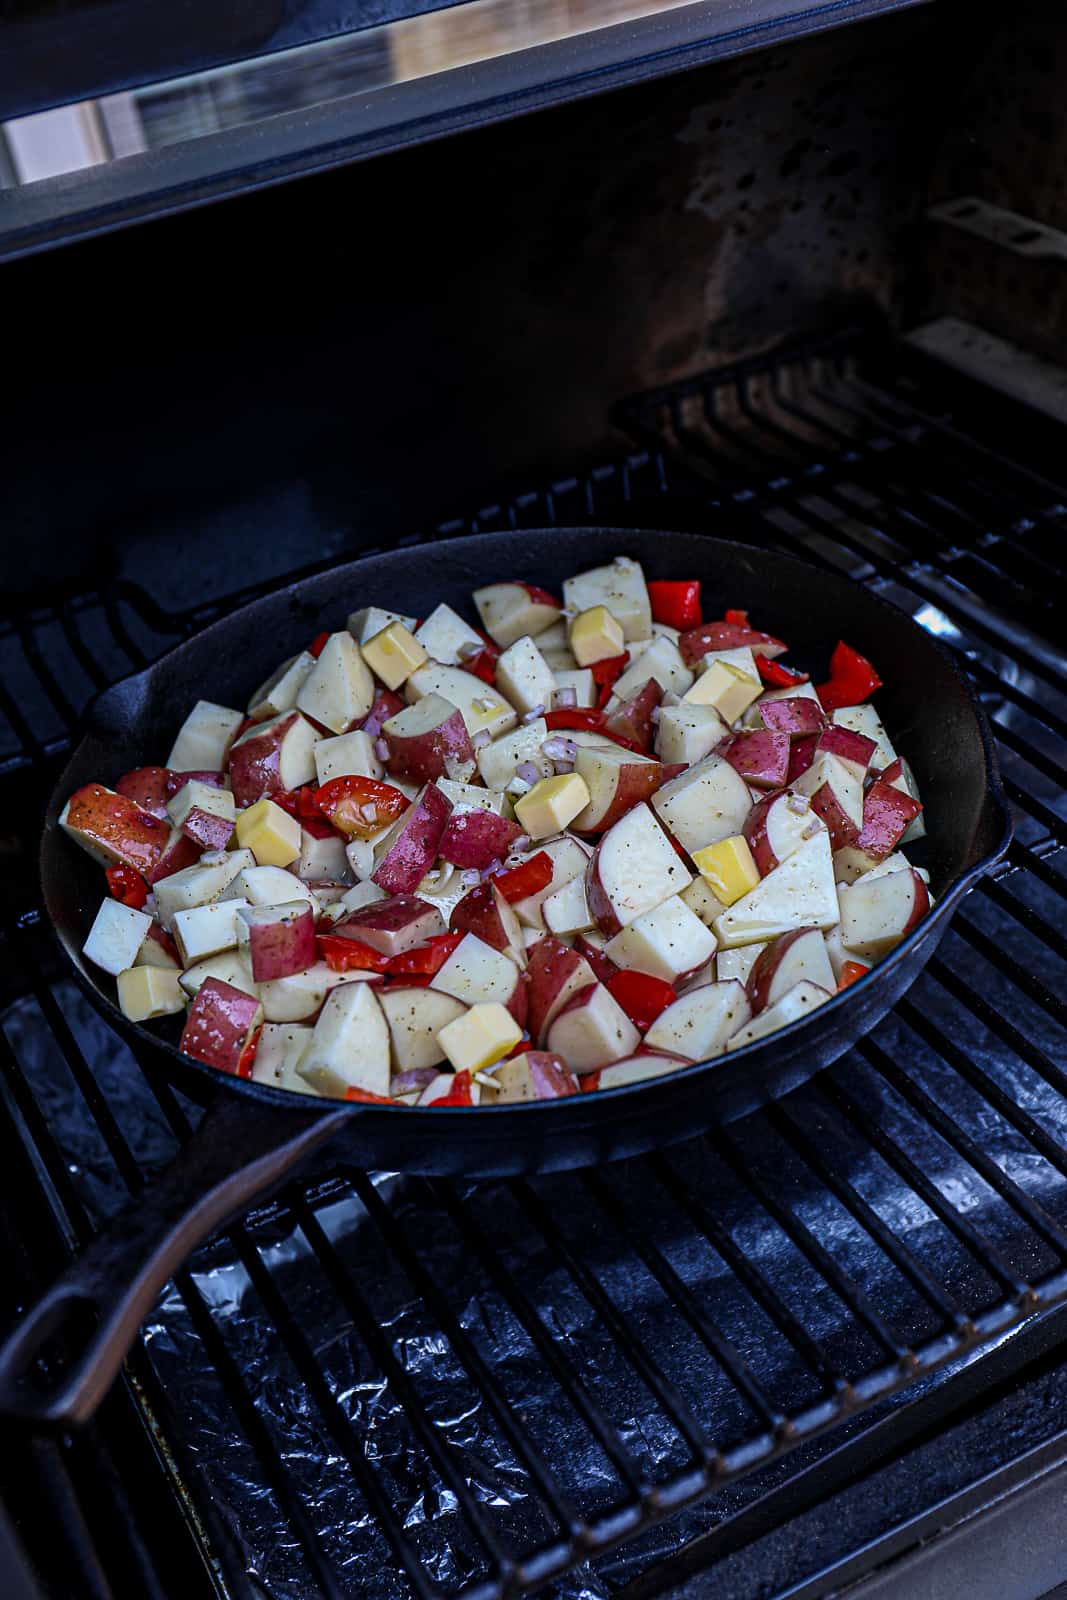 Cast iron skillet on the Traeger pellet grills with red potato ingredients